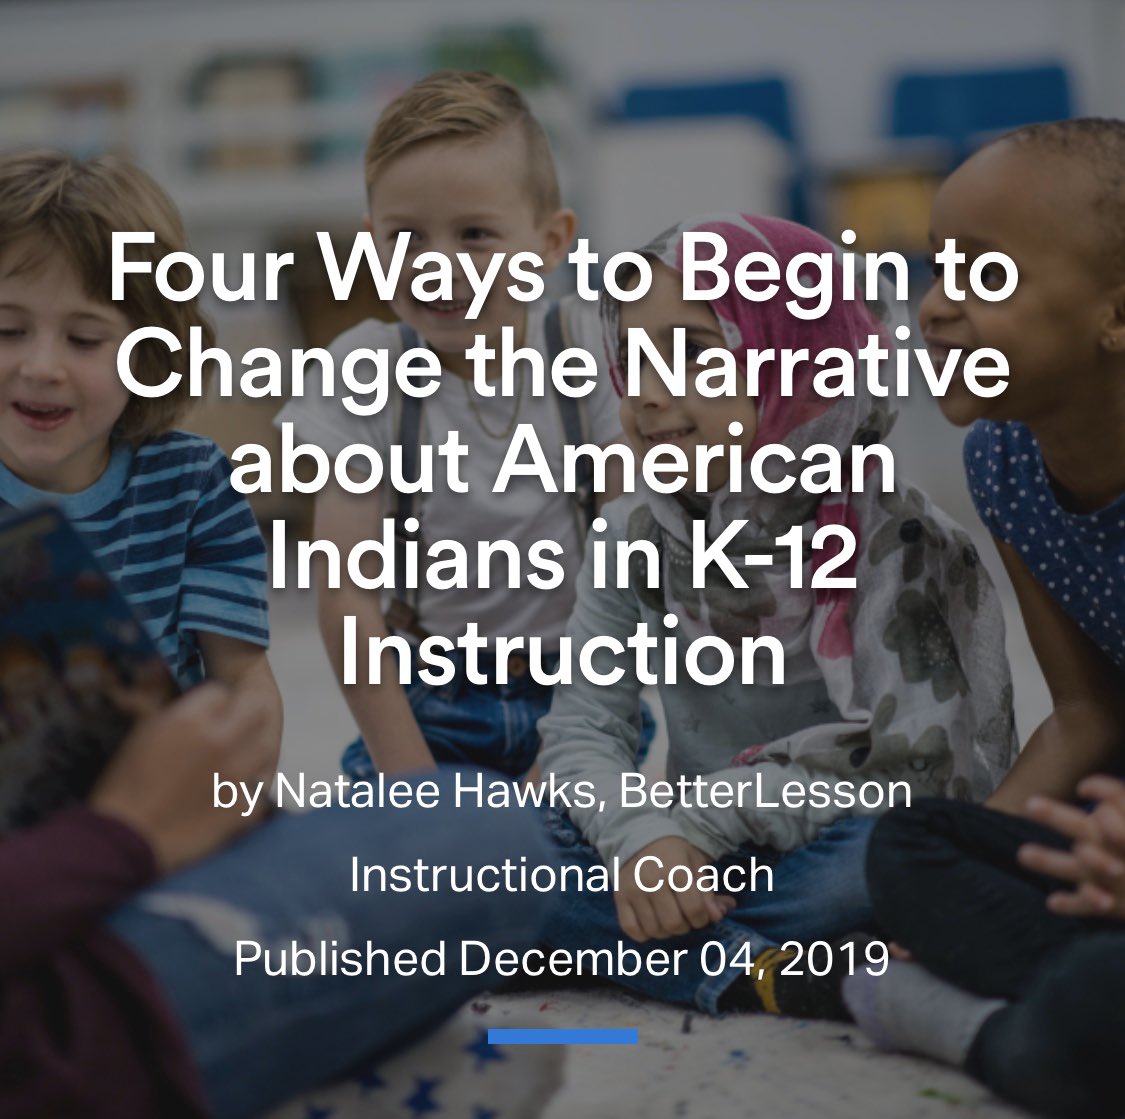 RT @WisDPIais: Four Ways to Begin to Change the Narrative about American Indians in K-12 Instruction blog.betterlesson.com/four-ways-to-c… | @WisconsinDPI @WisDPILit @BetterLesson @WieaOrg @WisDPIenviroed @NCSSNetwork @WCSS1  #wischat #wiamind #wiedu #firstnationswi